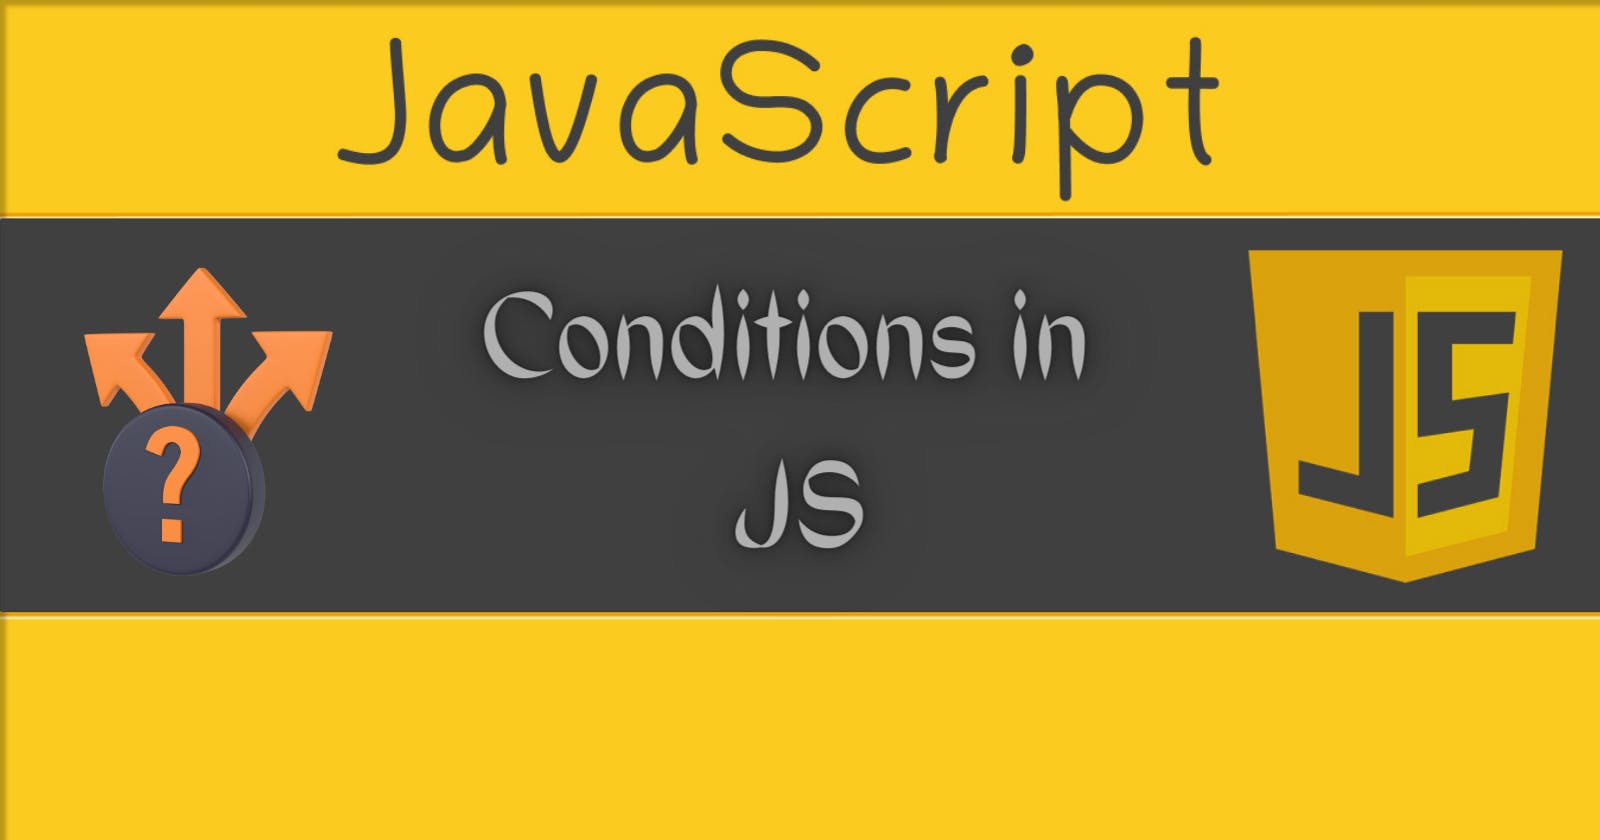 Conditions in JavaScript